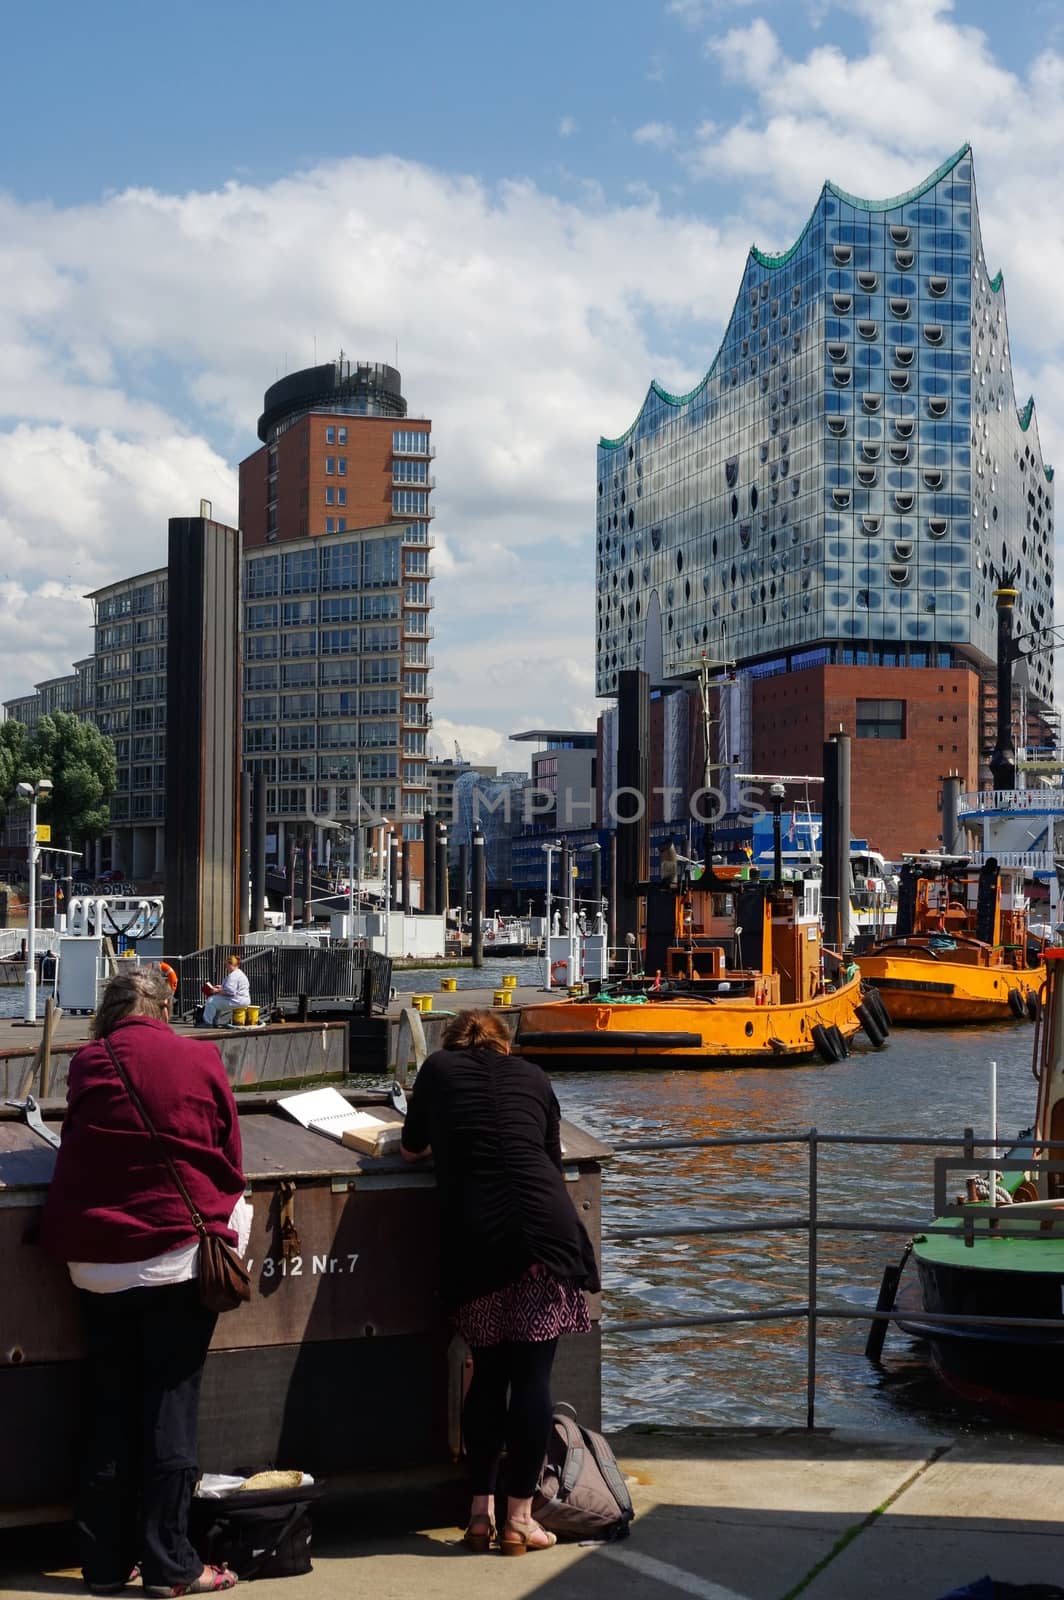 HAMBURG, GERMANY - JULY 18, 2015: the View of Hamburg from the port place, Hamburg is the second largest city in Germany and the eighth largest city in the European Union.